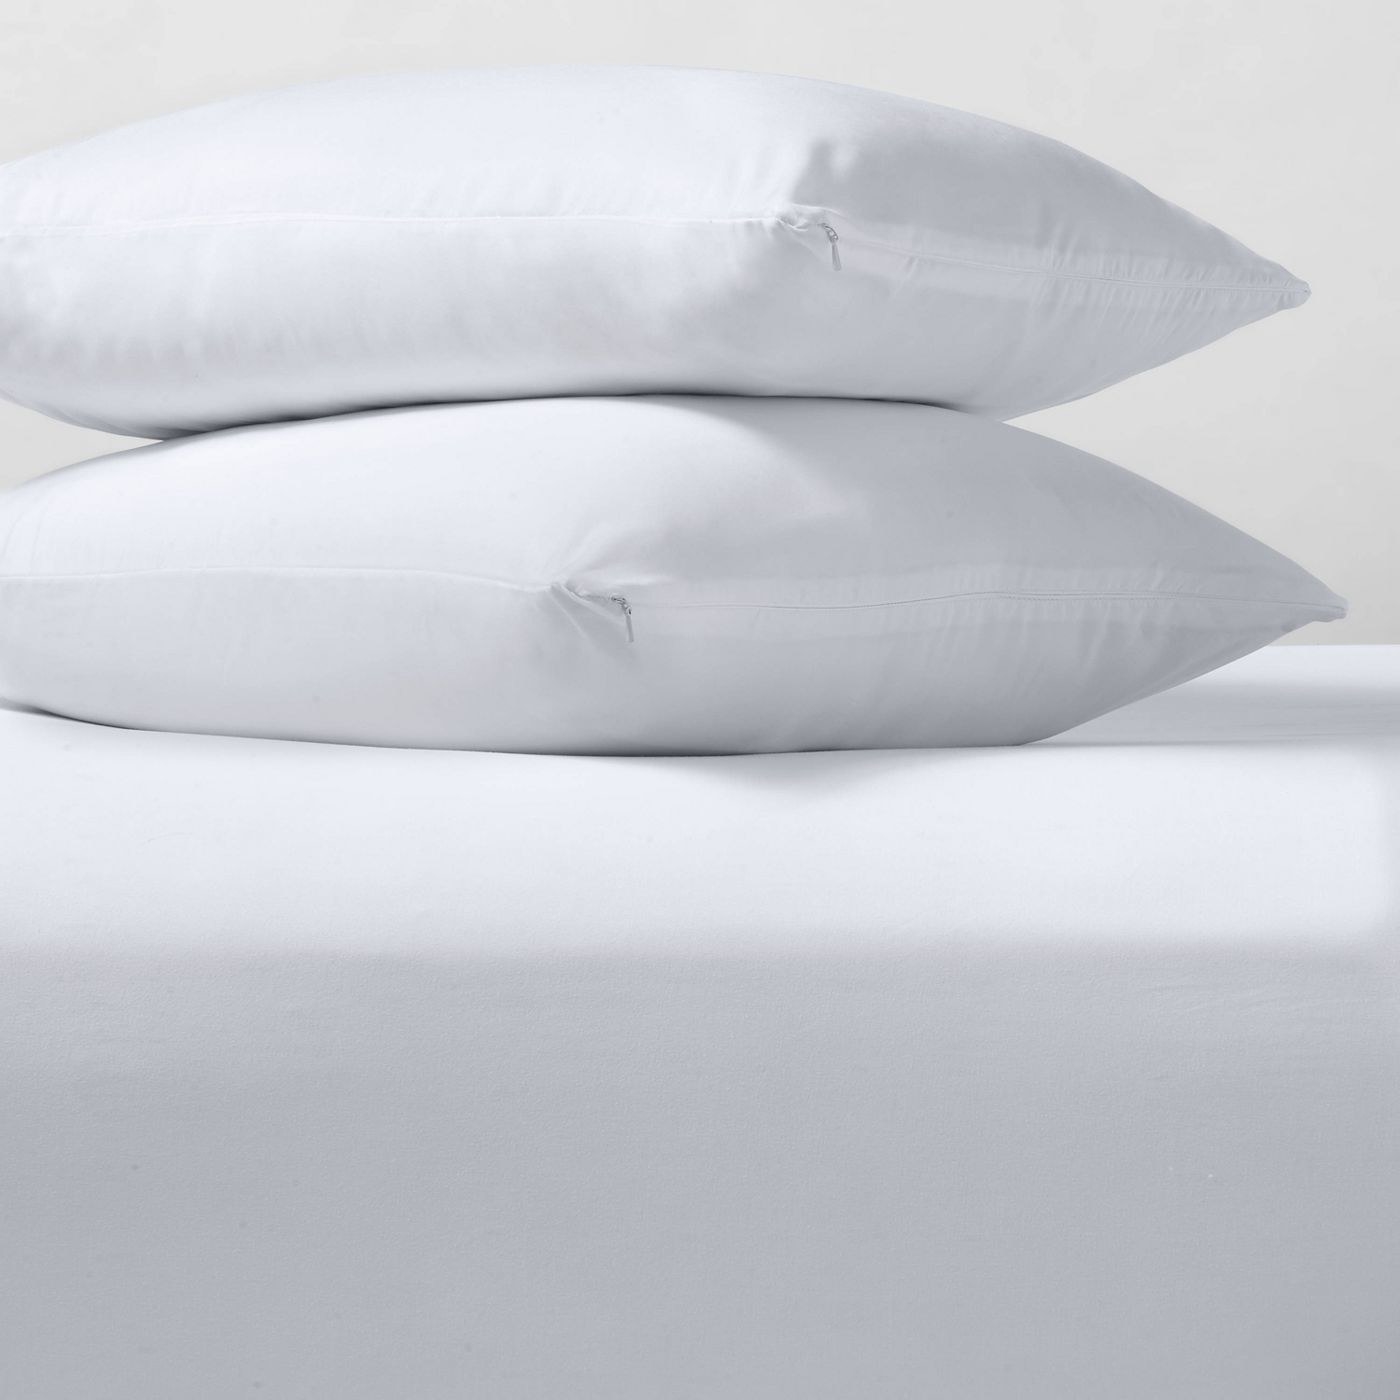 A white pillow protector